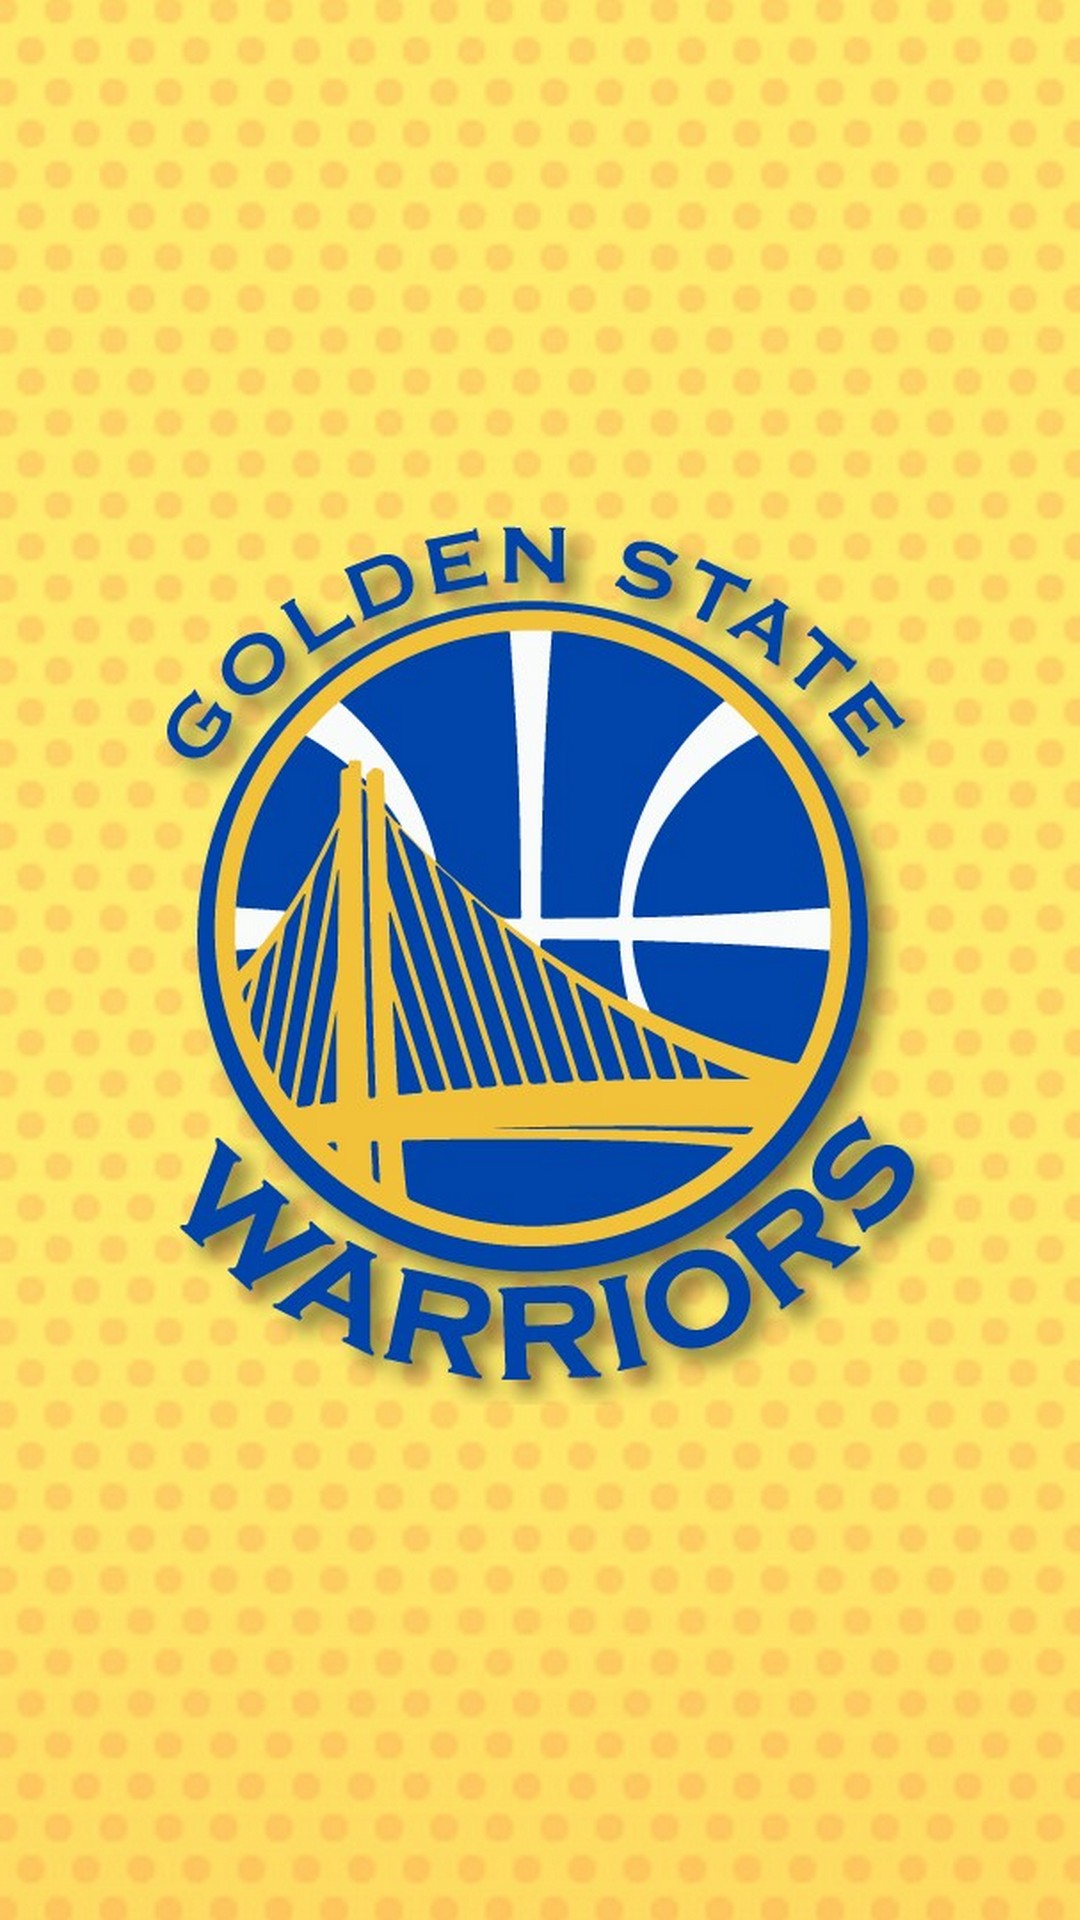 Golden State iPhone 7 Plus Wallpaper with image dimensions 1080x1920 pixel. You can make this wallpaper for your Desktop Computer Backgrounds, Windows or Mac Screensavers, iPhone Lock screen, Tablet or Android and another Mobile Phone device